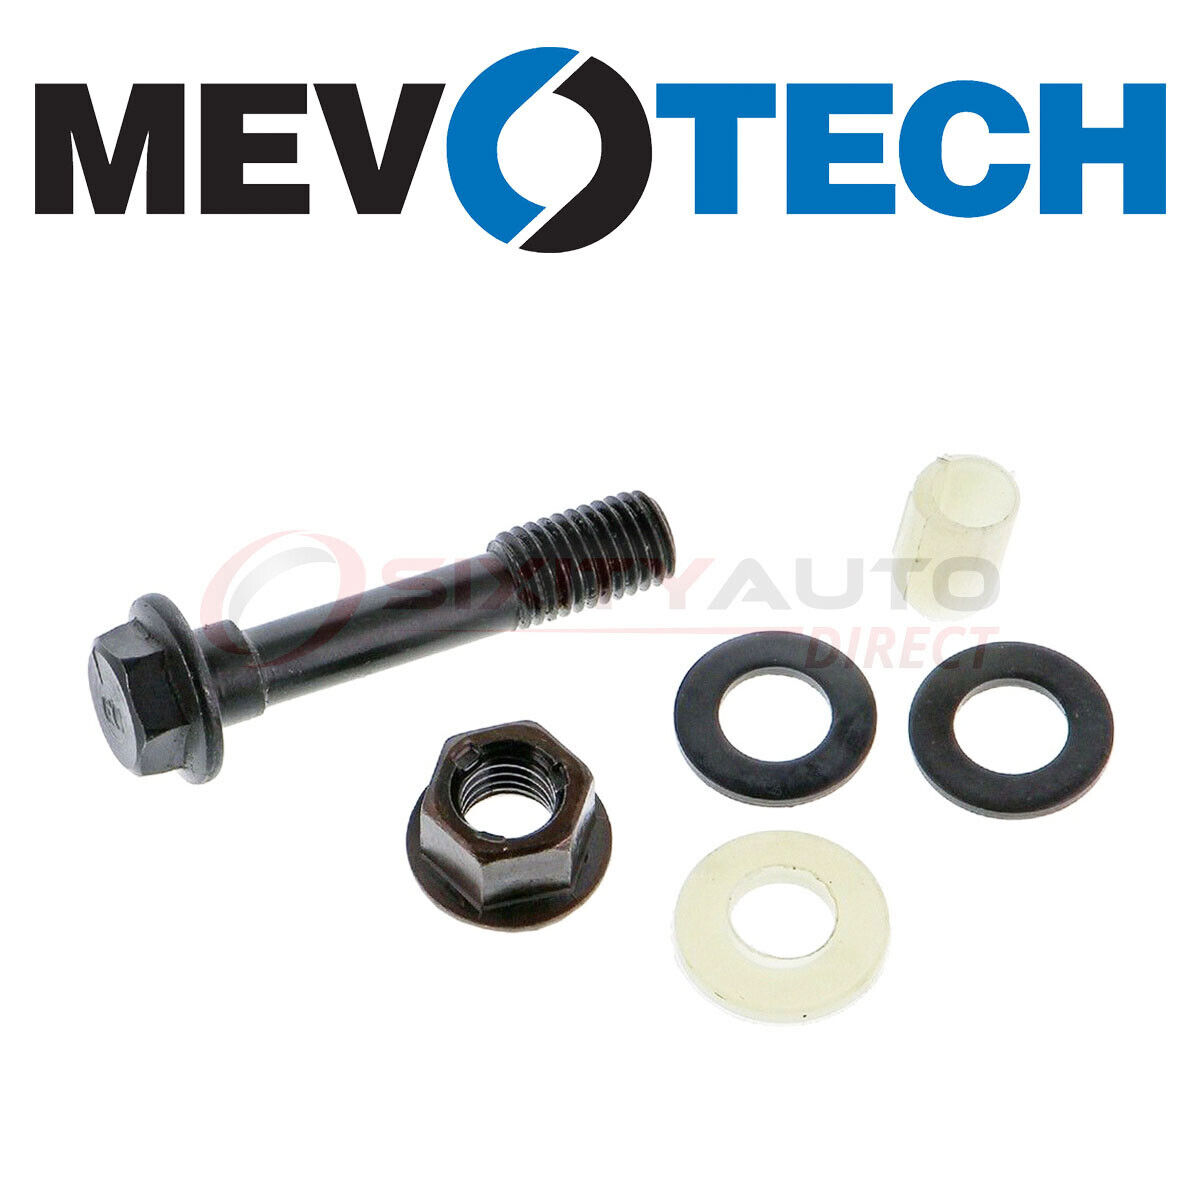 Mevotech Alignment Camber Kit for 1987-1994 Plymouth Sundance 2.2L 2.5L 3.0L sg